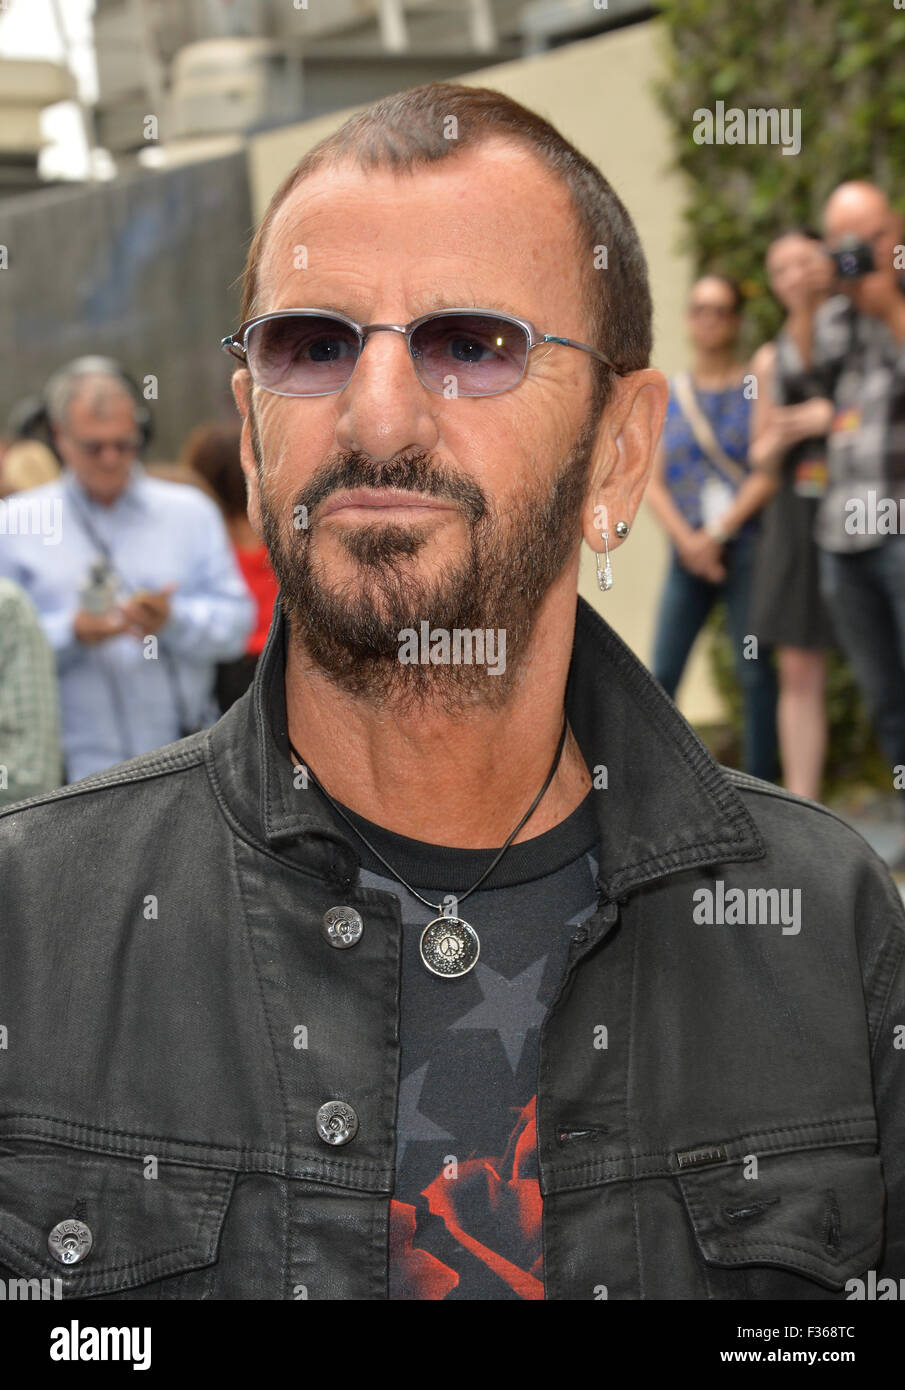 LOS ANGELES, CA - JULY 7, 2015: Ringo Starr at photocall at Capitol Records, Hollywood, to celebrate his 75th birthday. Stock Photo